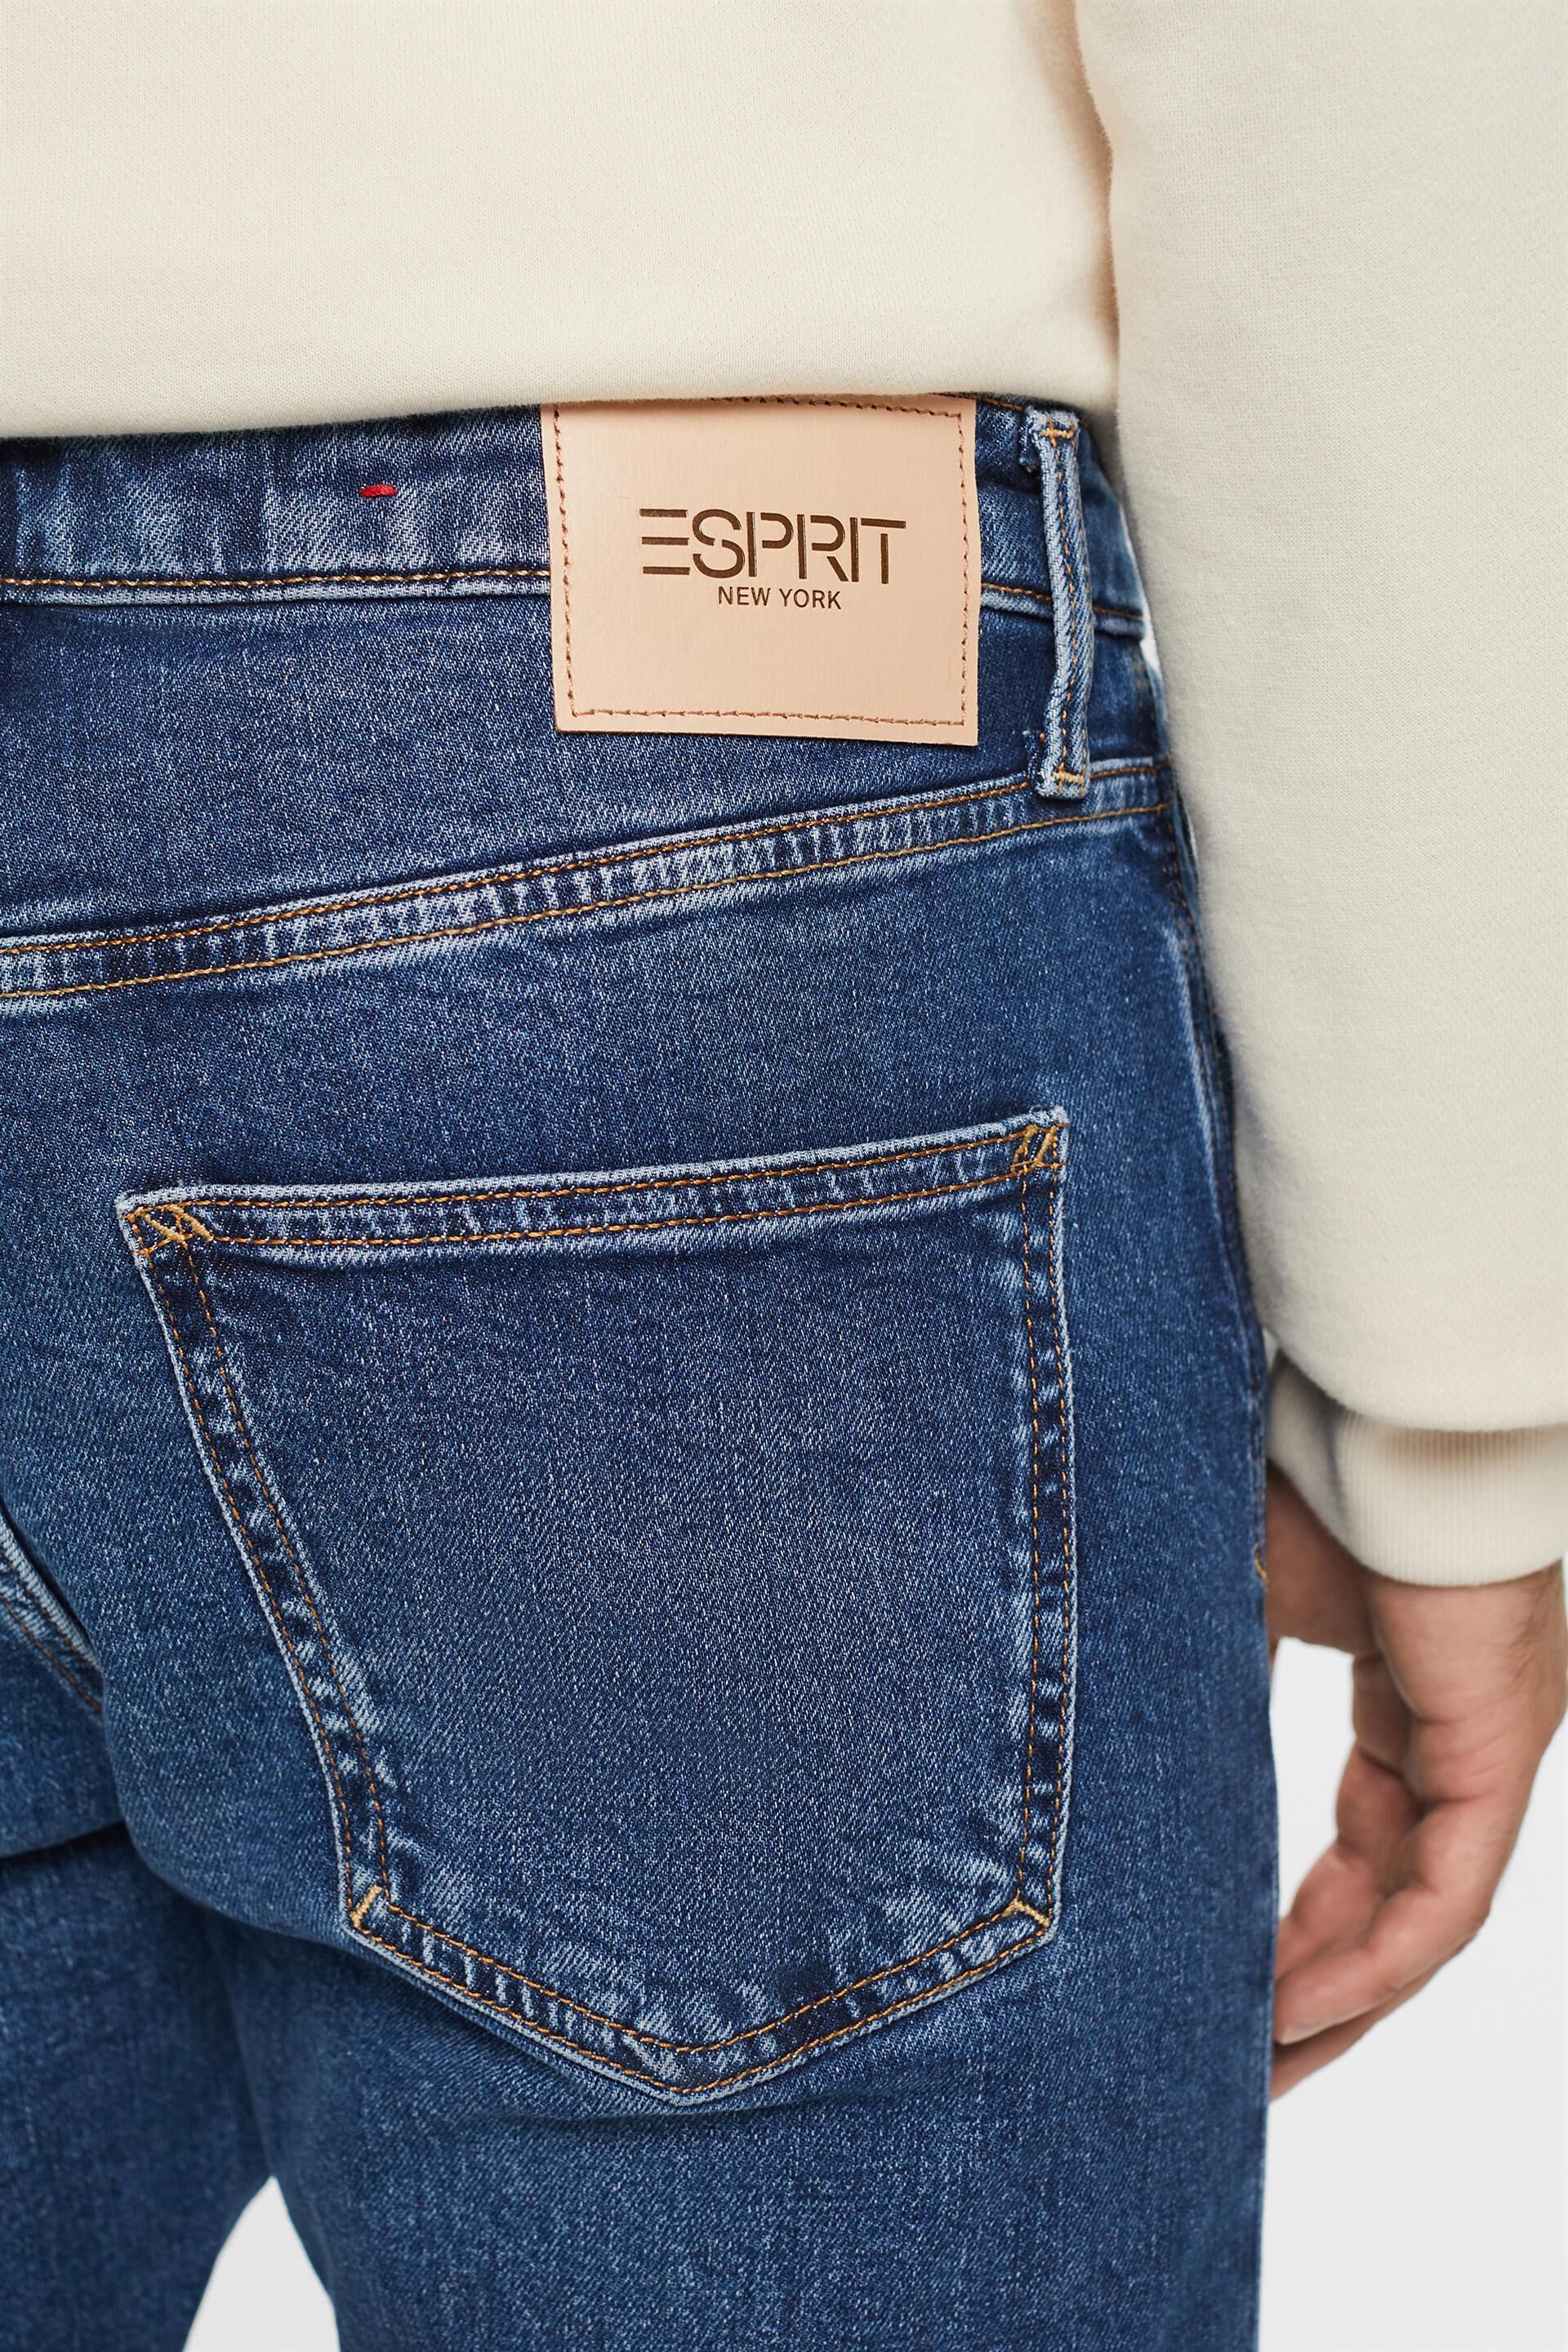 shop jeans fit - ESPRIT online slim Recycled: our at